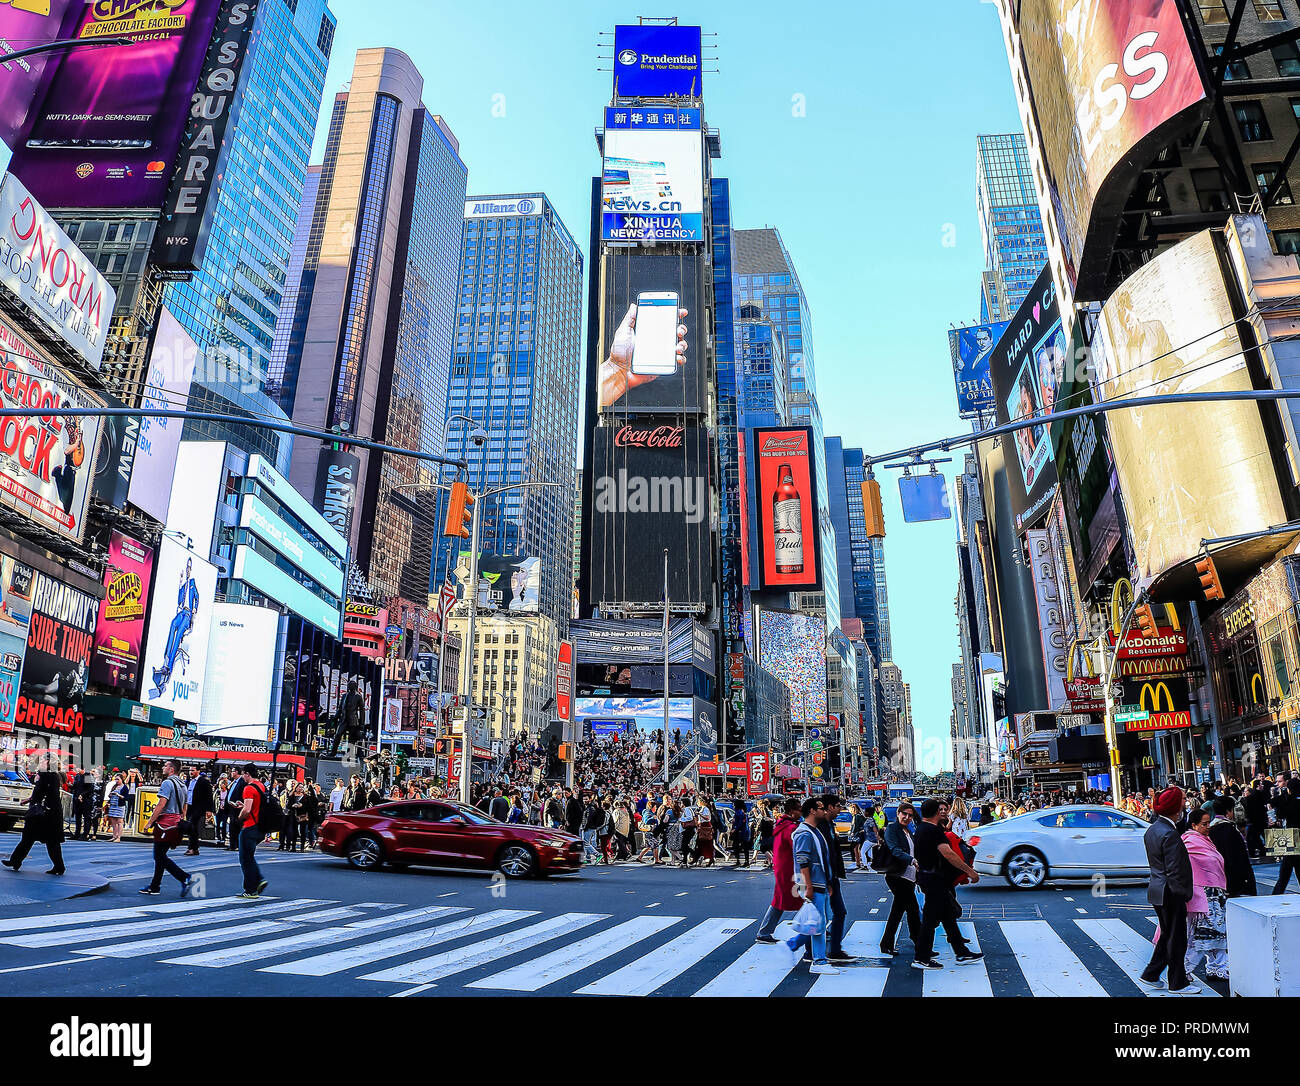 New York City, USA - June 7, 2017: Times Square at sunset Stock Photo